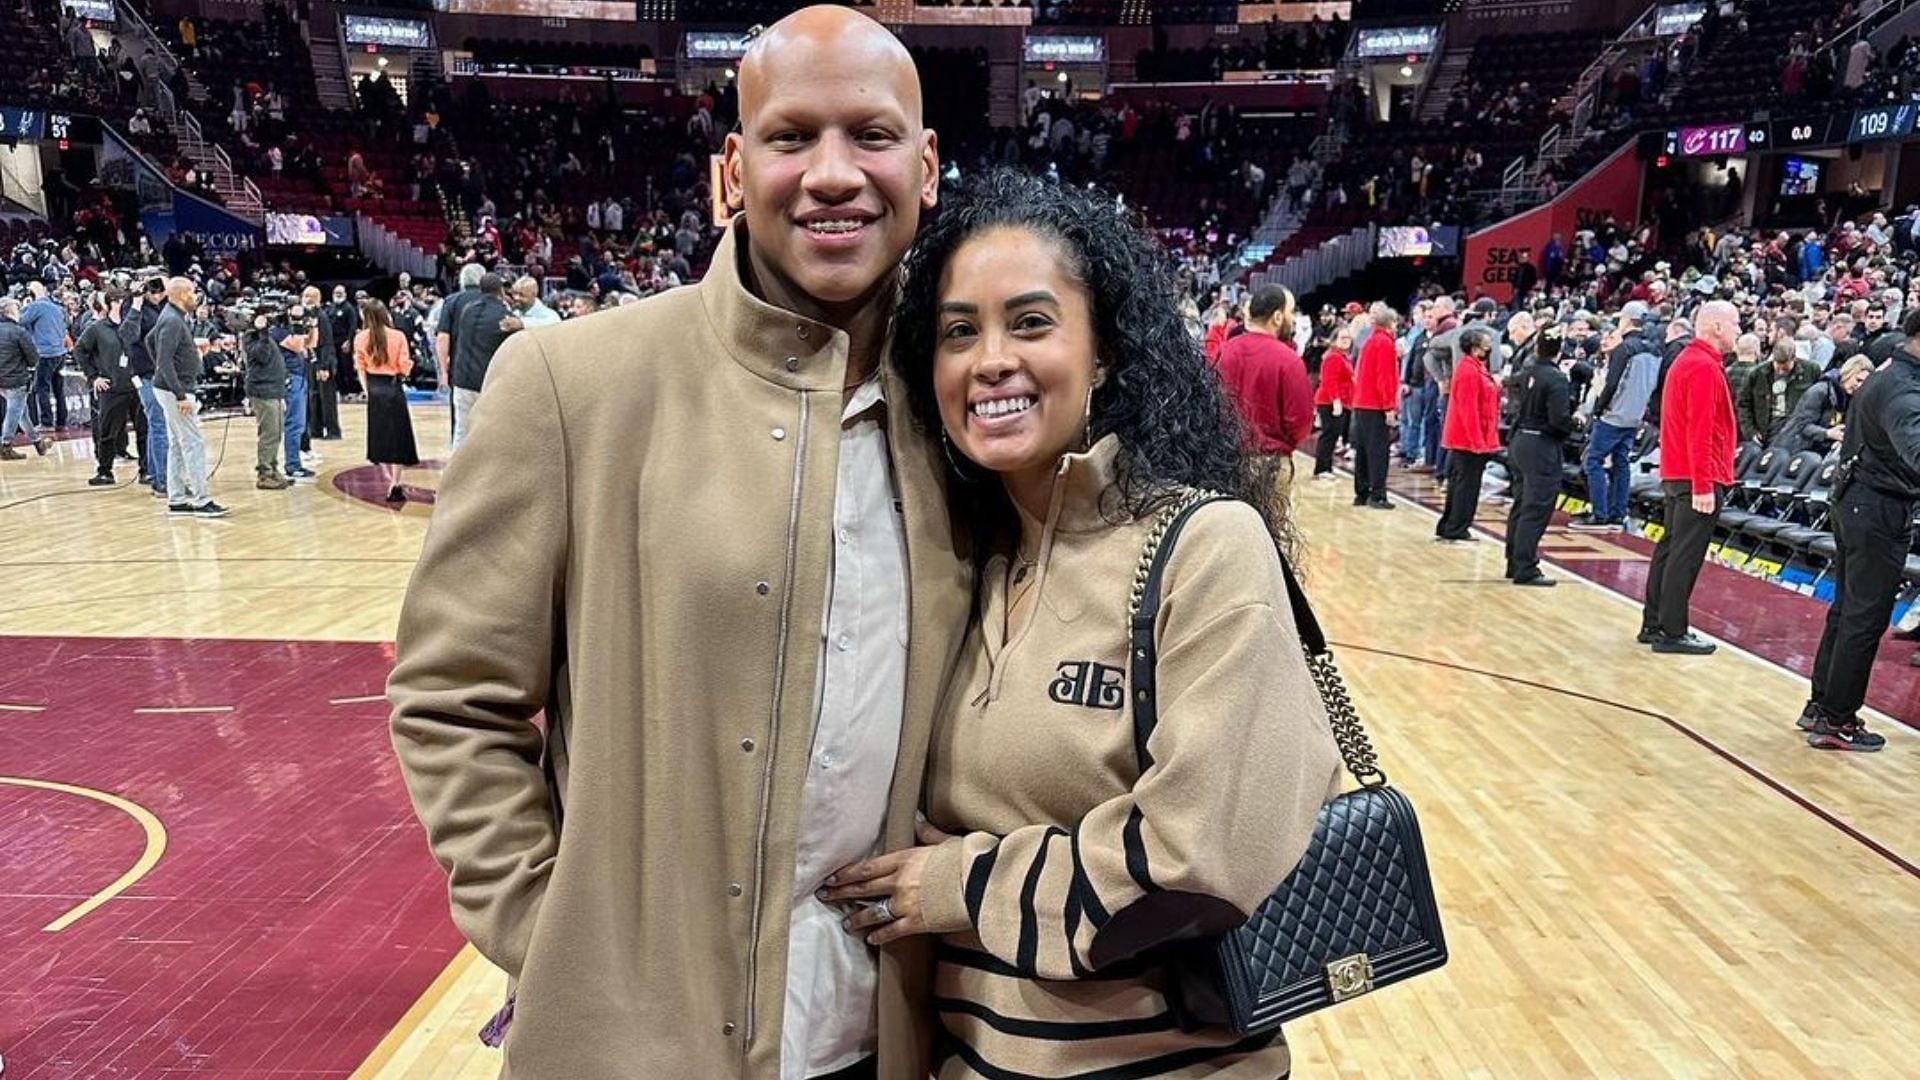 Former NFL player Ryan Shazier and his wife, Michelle Rodriguez (Image credit: Ryan Shazier on Instagram)